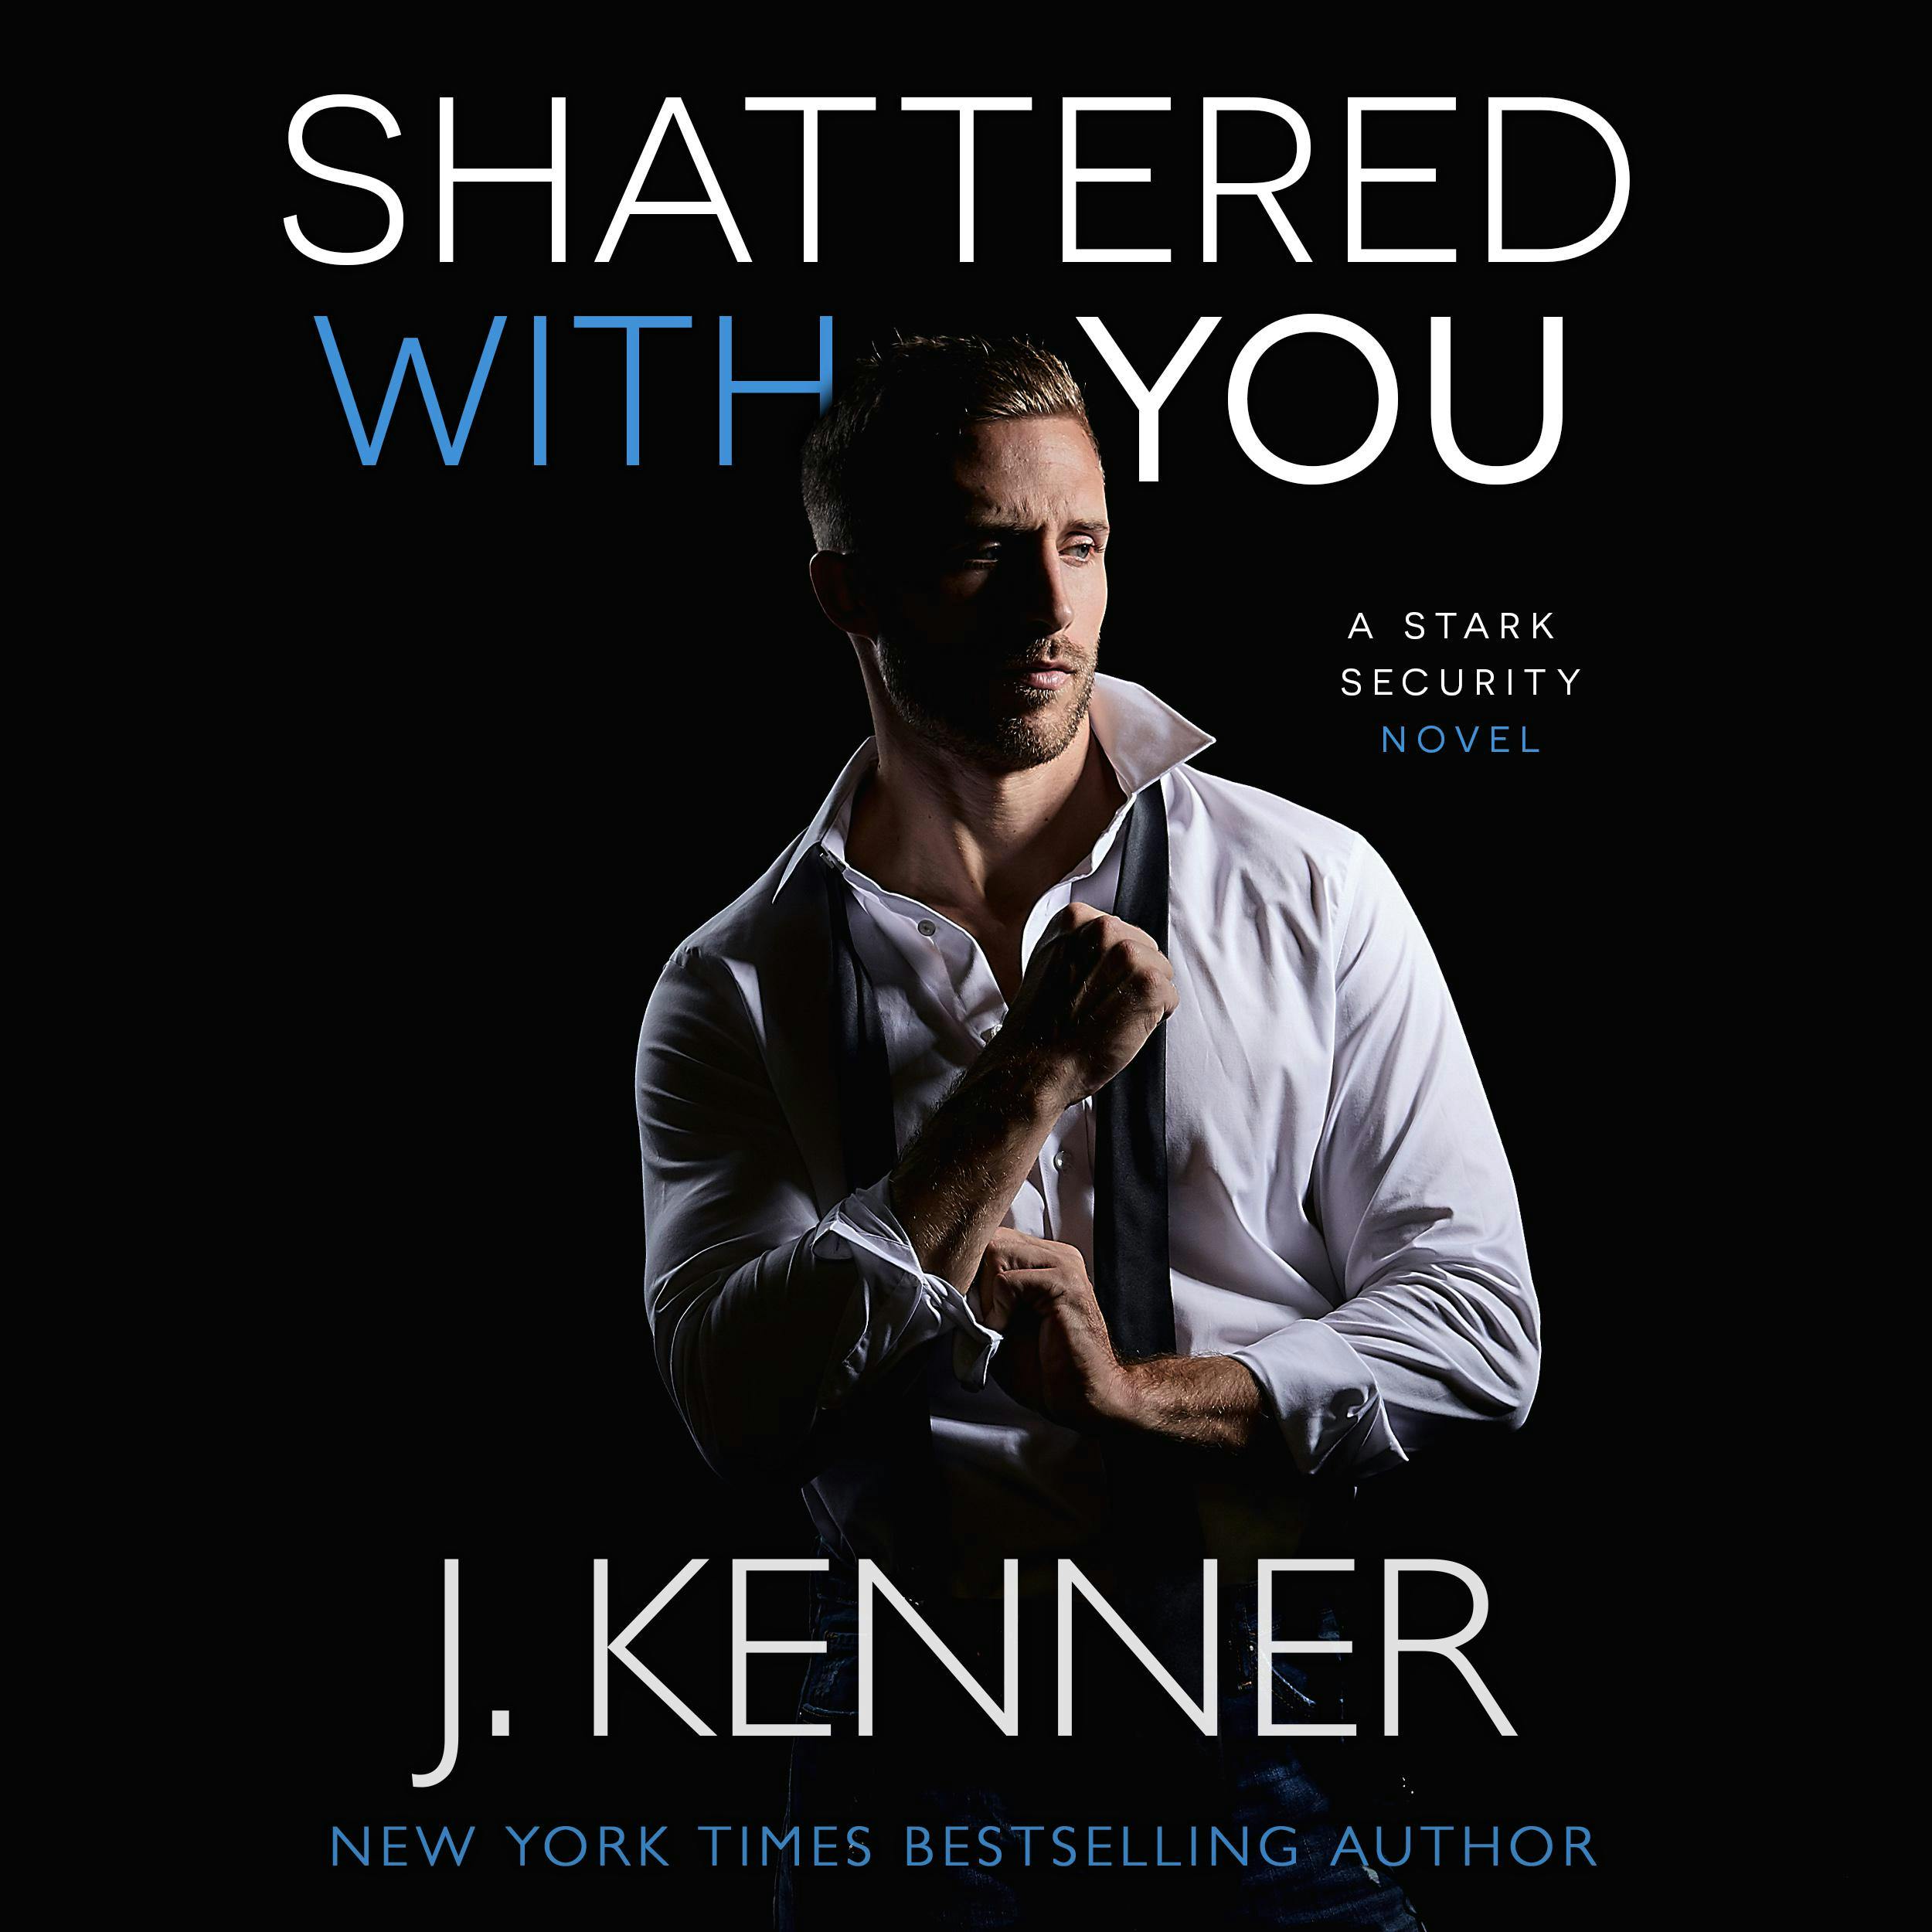 Shattered With You (Stark Security Book 1) - J. Kenner